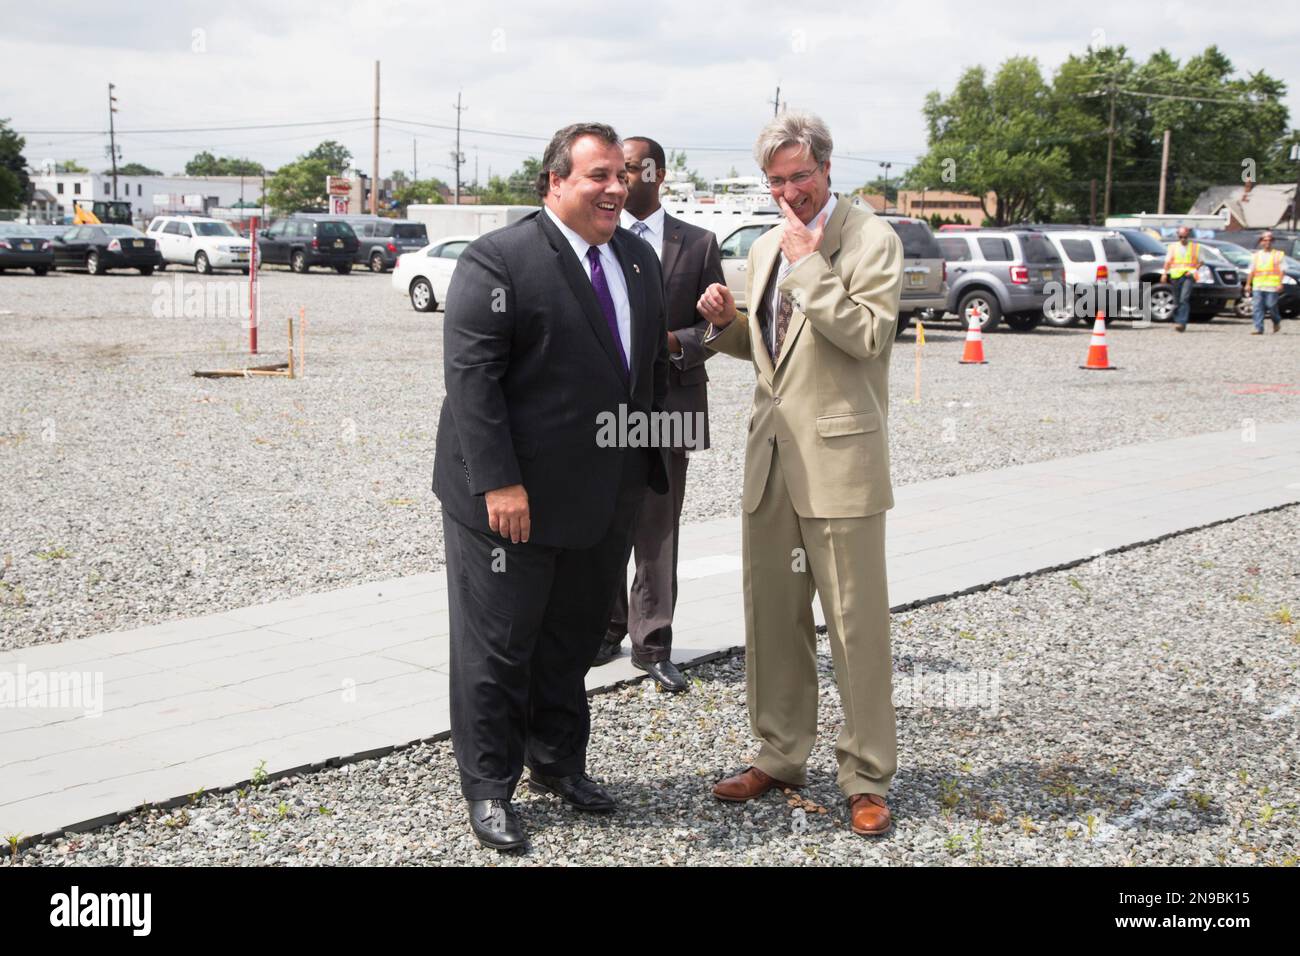 pseg-ceo-ralph-izzo-right-confers-with-new-jersey-governor-chris